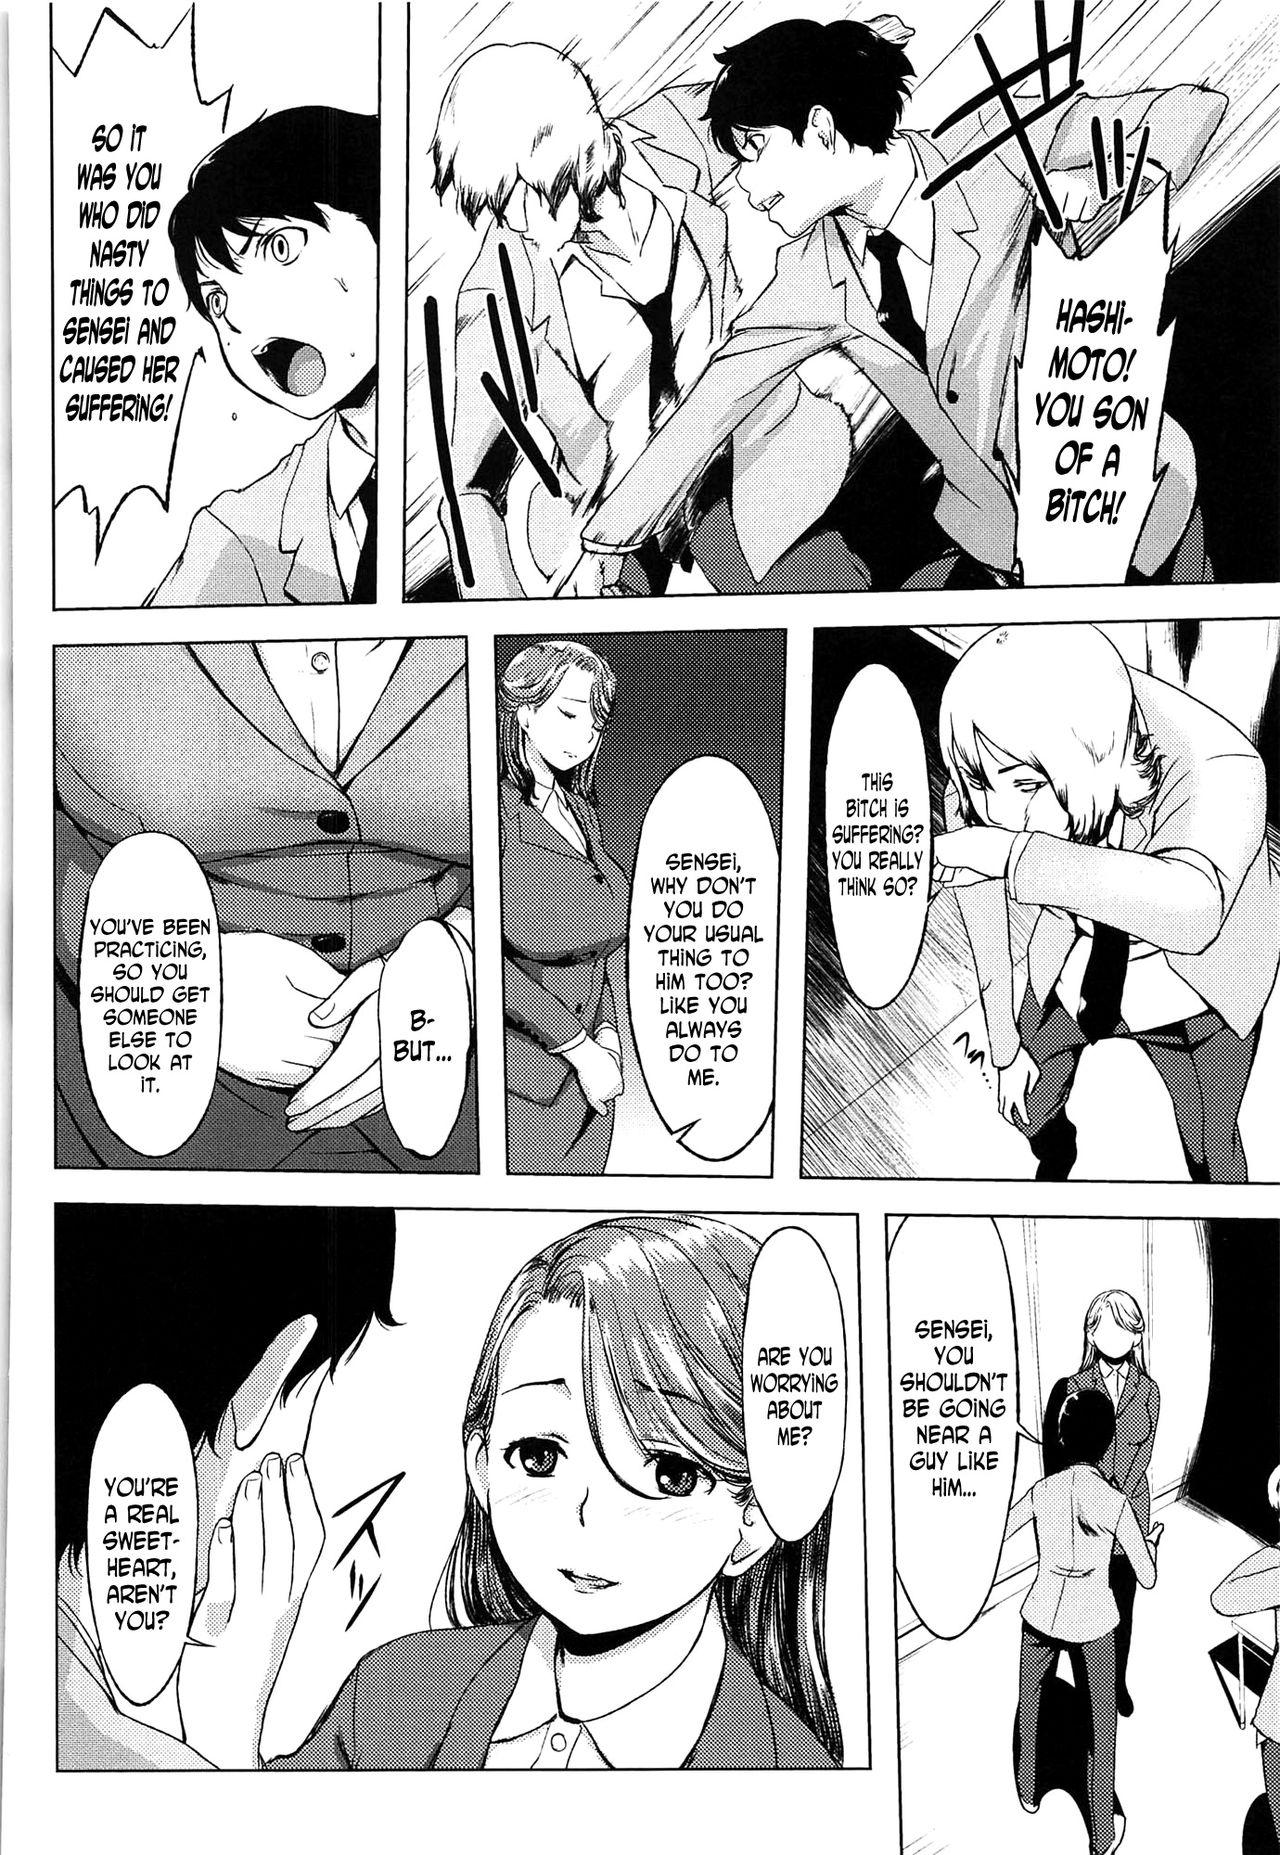 Wife Sensei Eating Pussy - Page 12